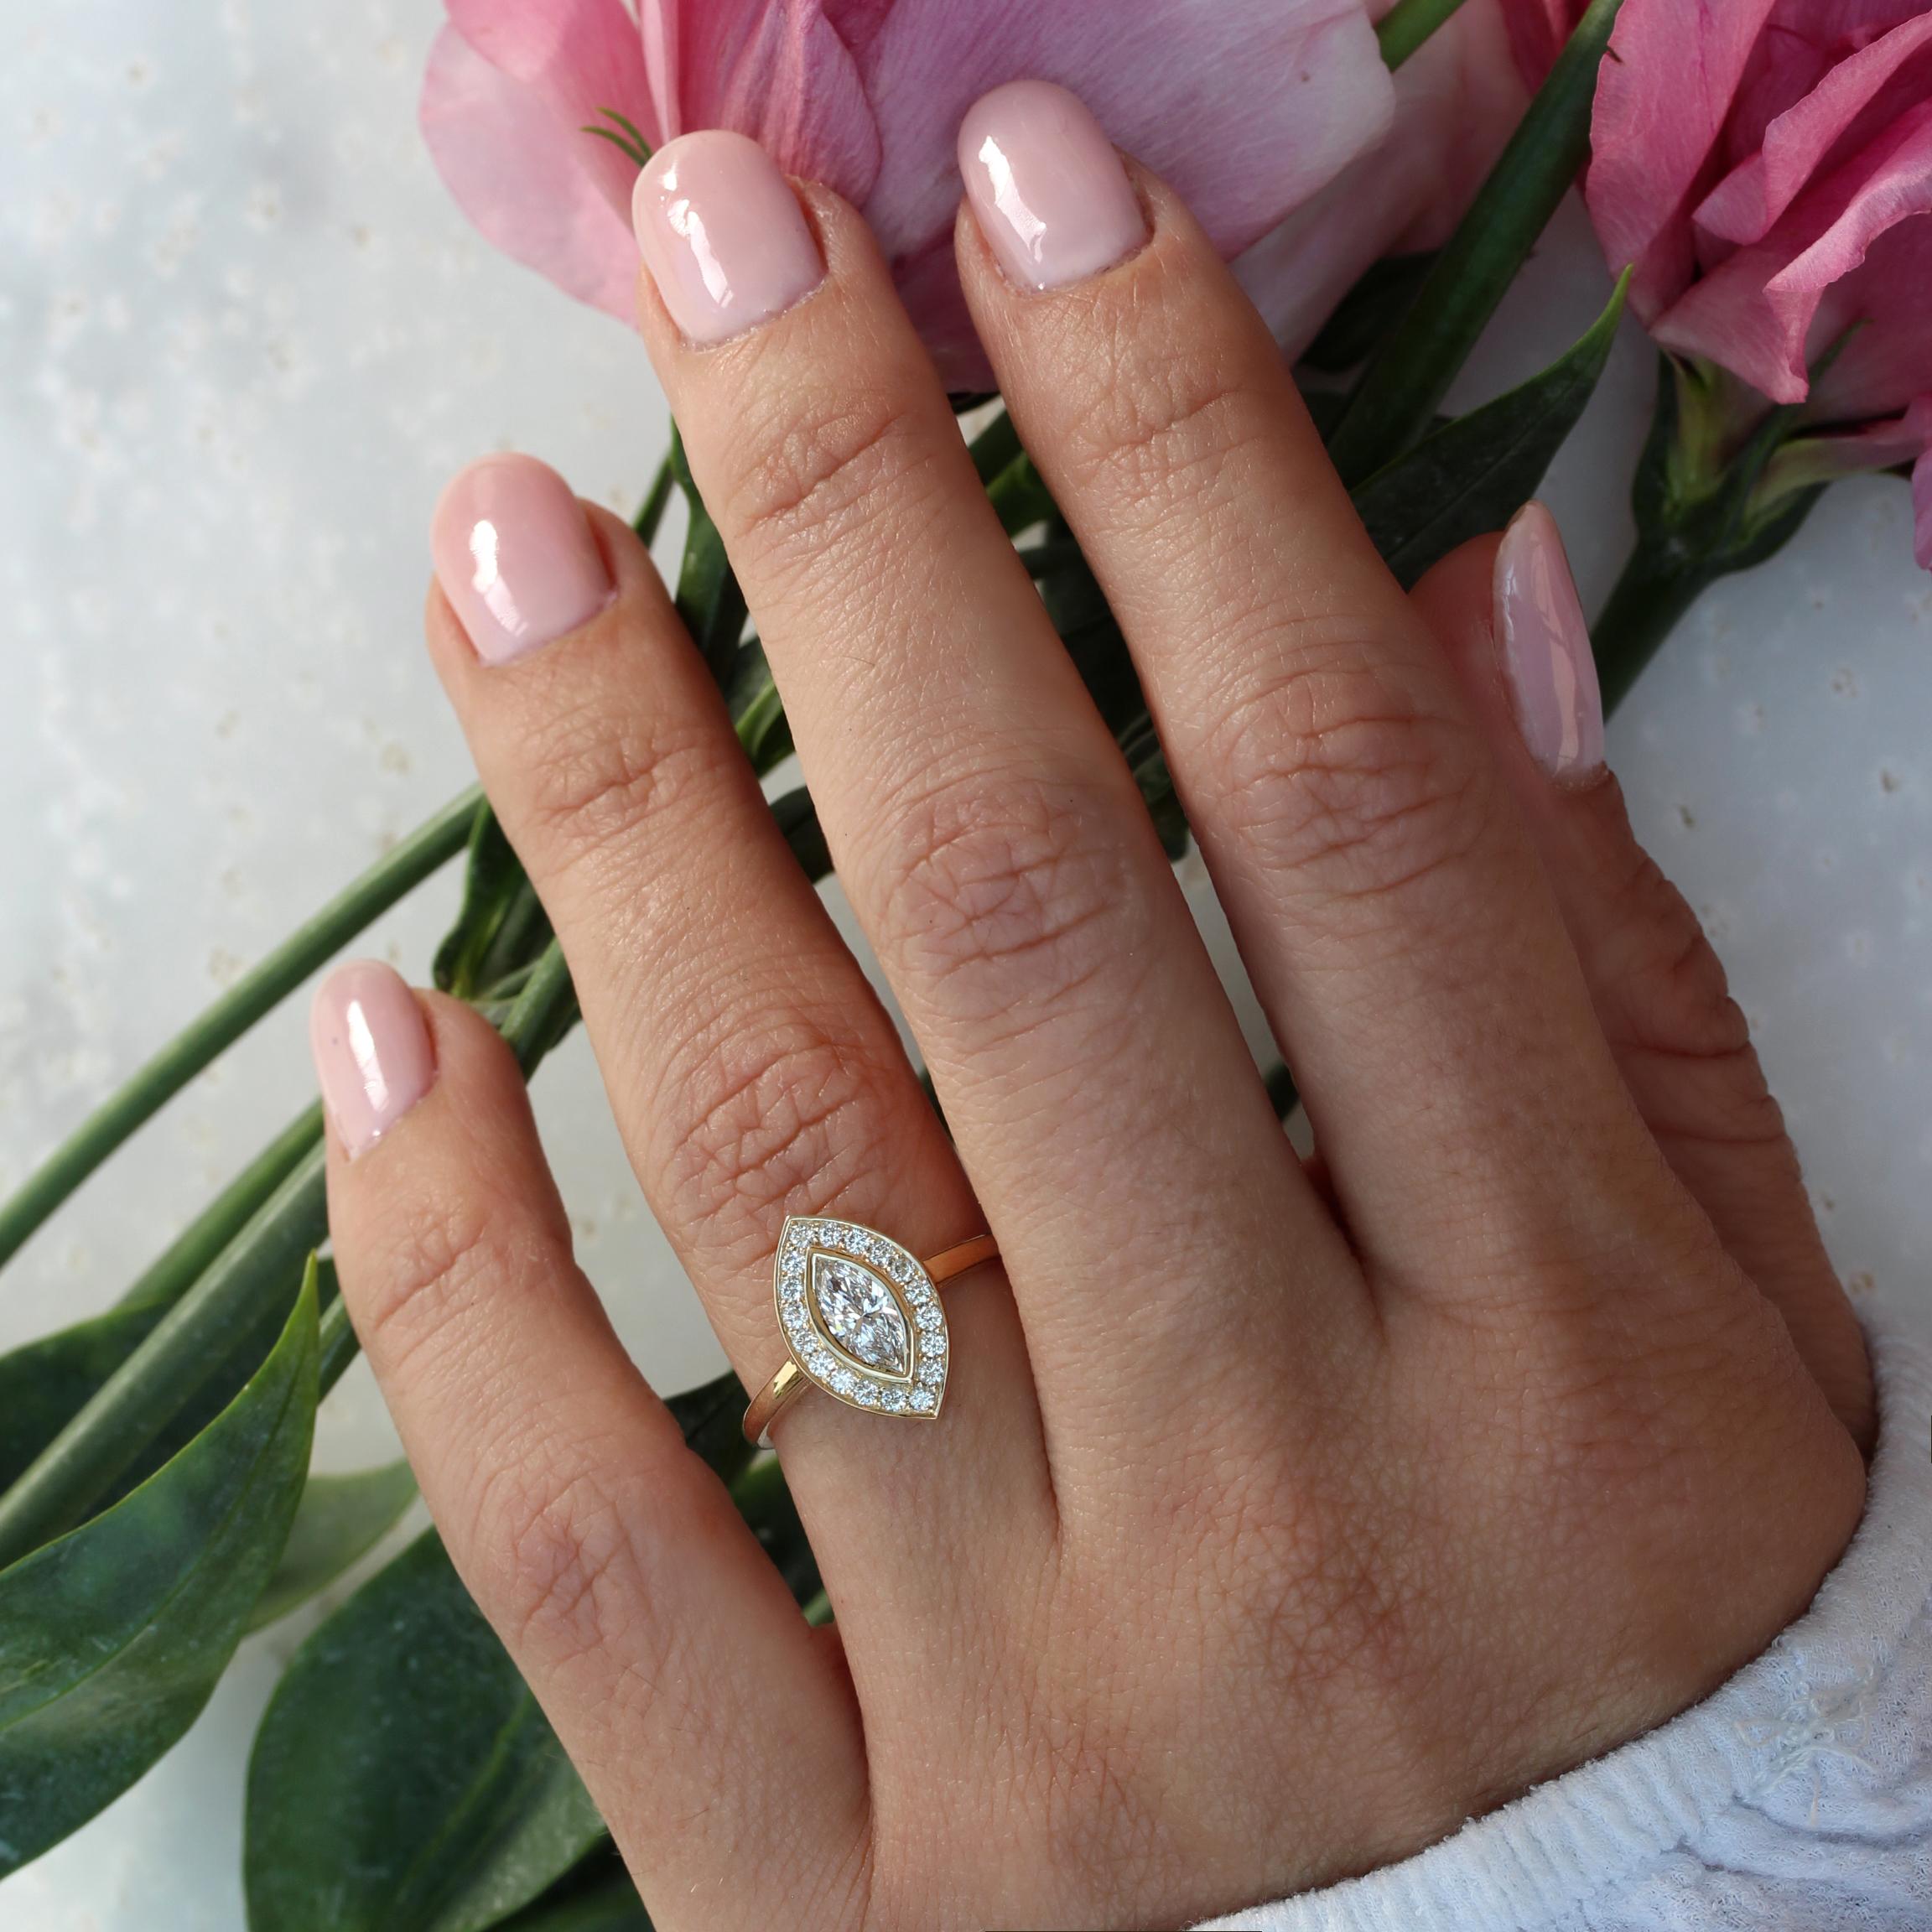 Marquise-shaped moissanite, bezel set, with a natural diamond halo - Classic and Elegant Ring. 
This list is for the engagement ring only.
This is made to order. Handmade with care. 
An original design by Silly Shiny Diamonds. 

Details: 
* Center